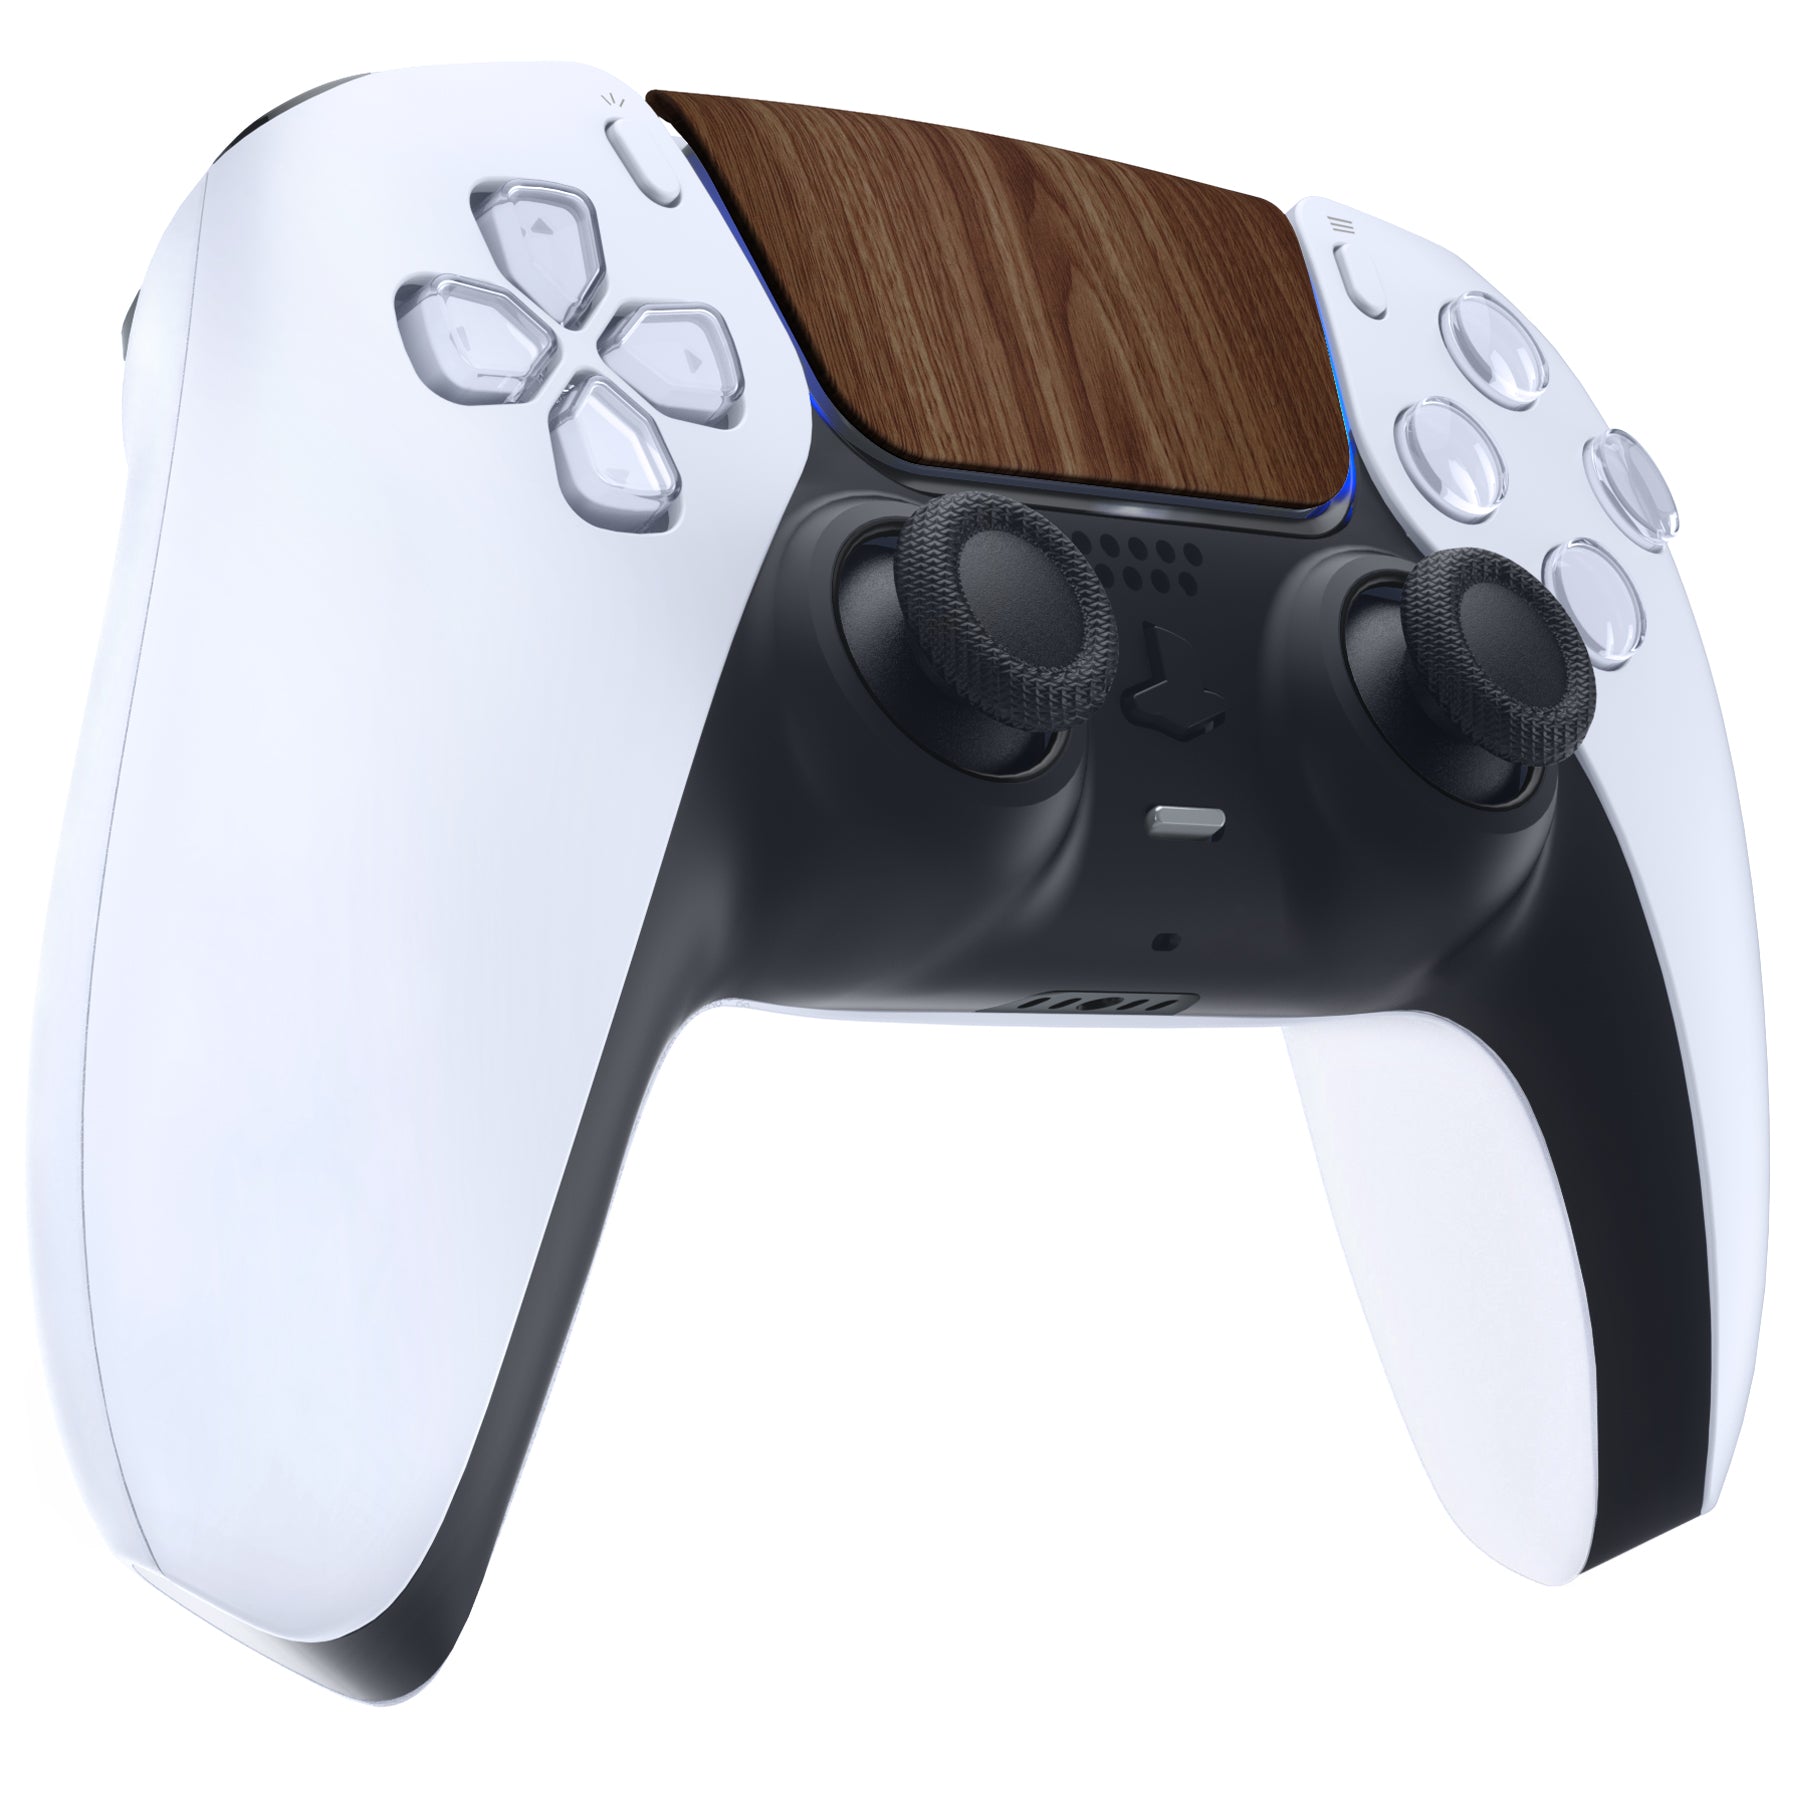 eXtremeRate Wood Grain Soft Touch Replacement Touchpad Cover Compatible with PS5 Controller BDM-010 BDM-020 & BDM-030, Custom Part Touch Pad